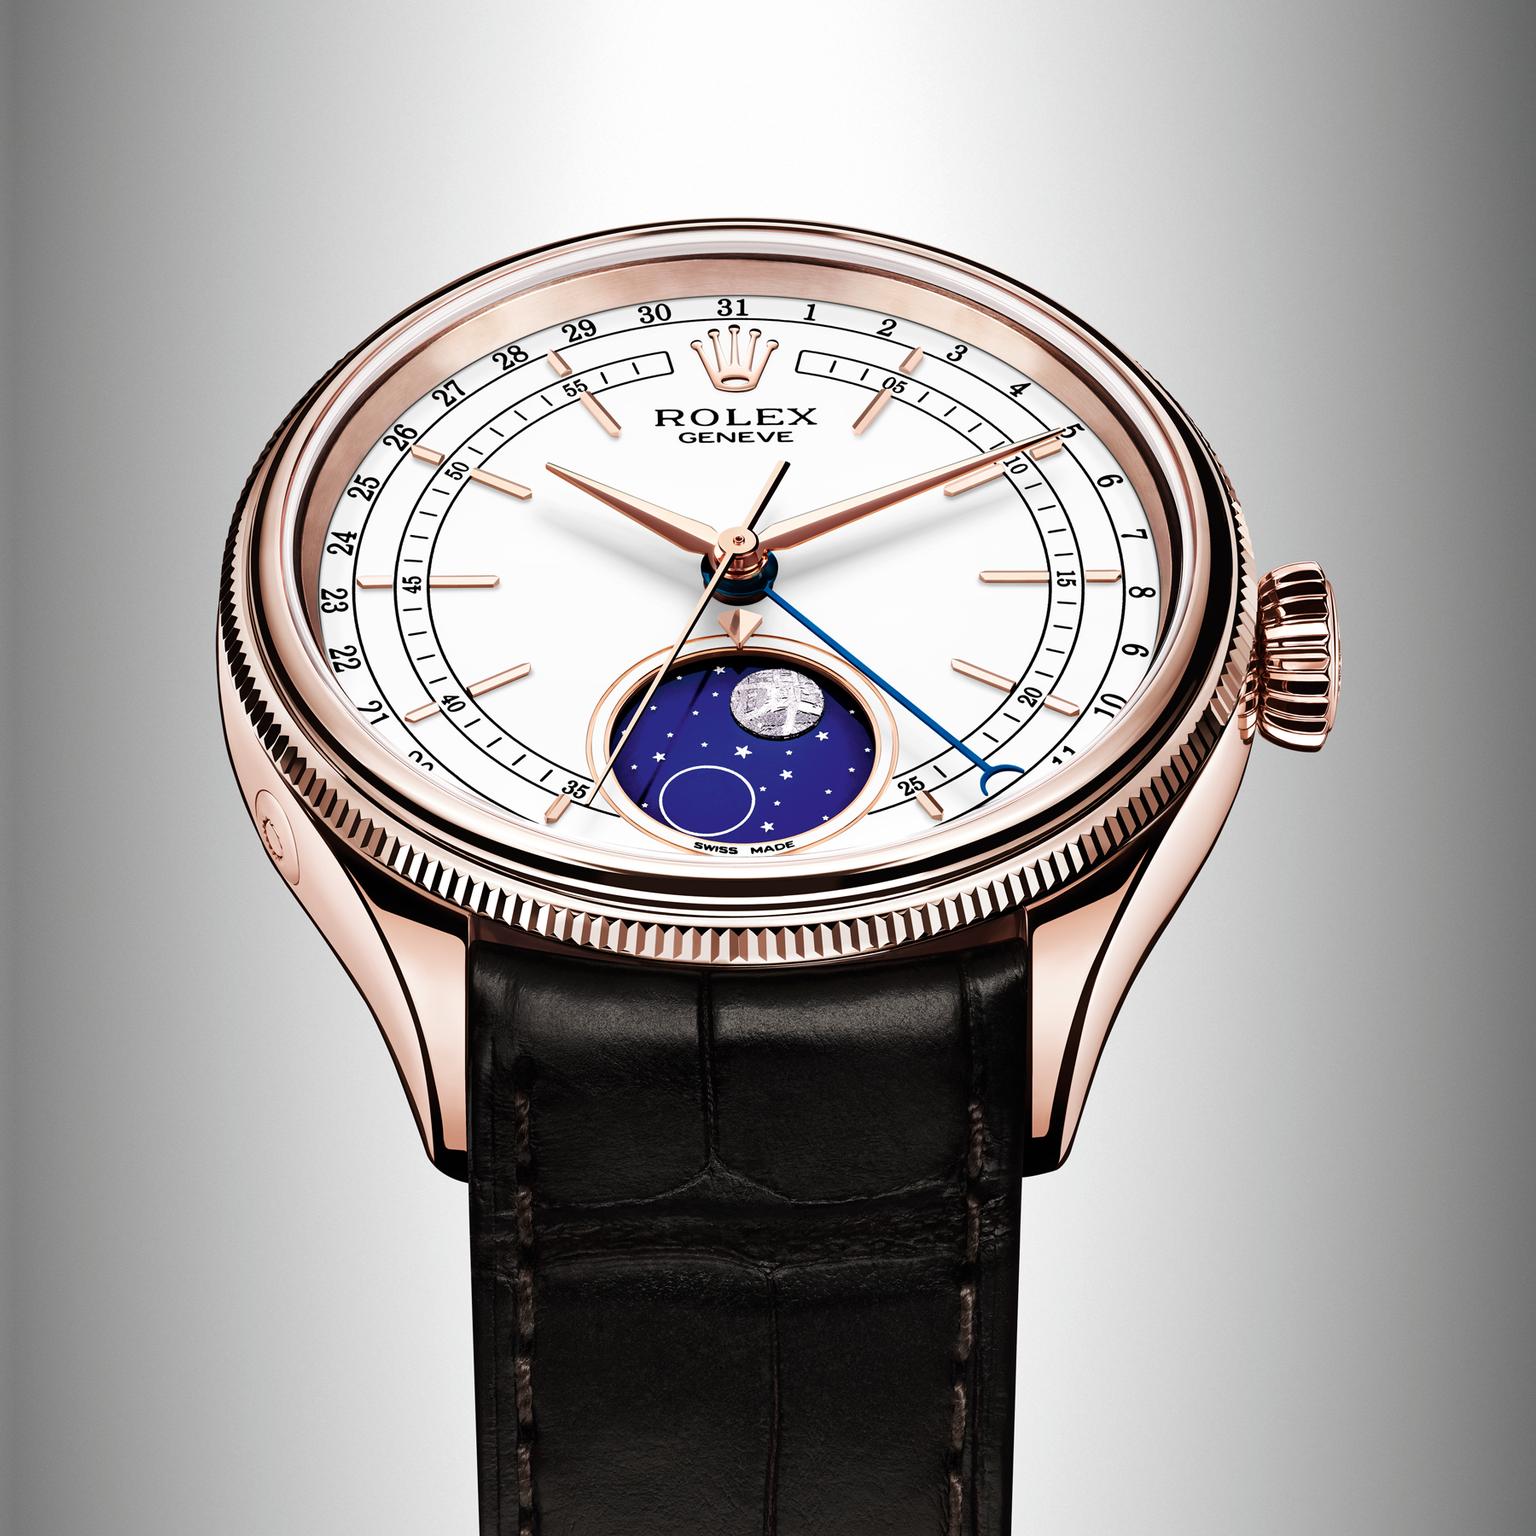 Rolex Cellini Moonphase watch 2017